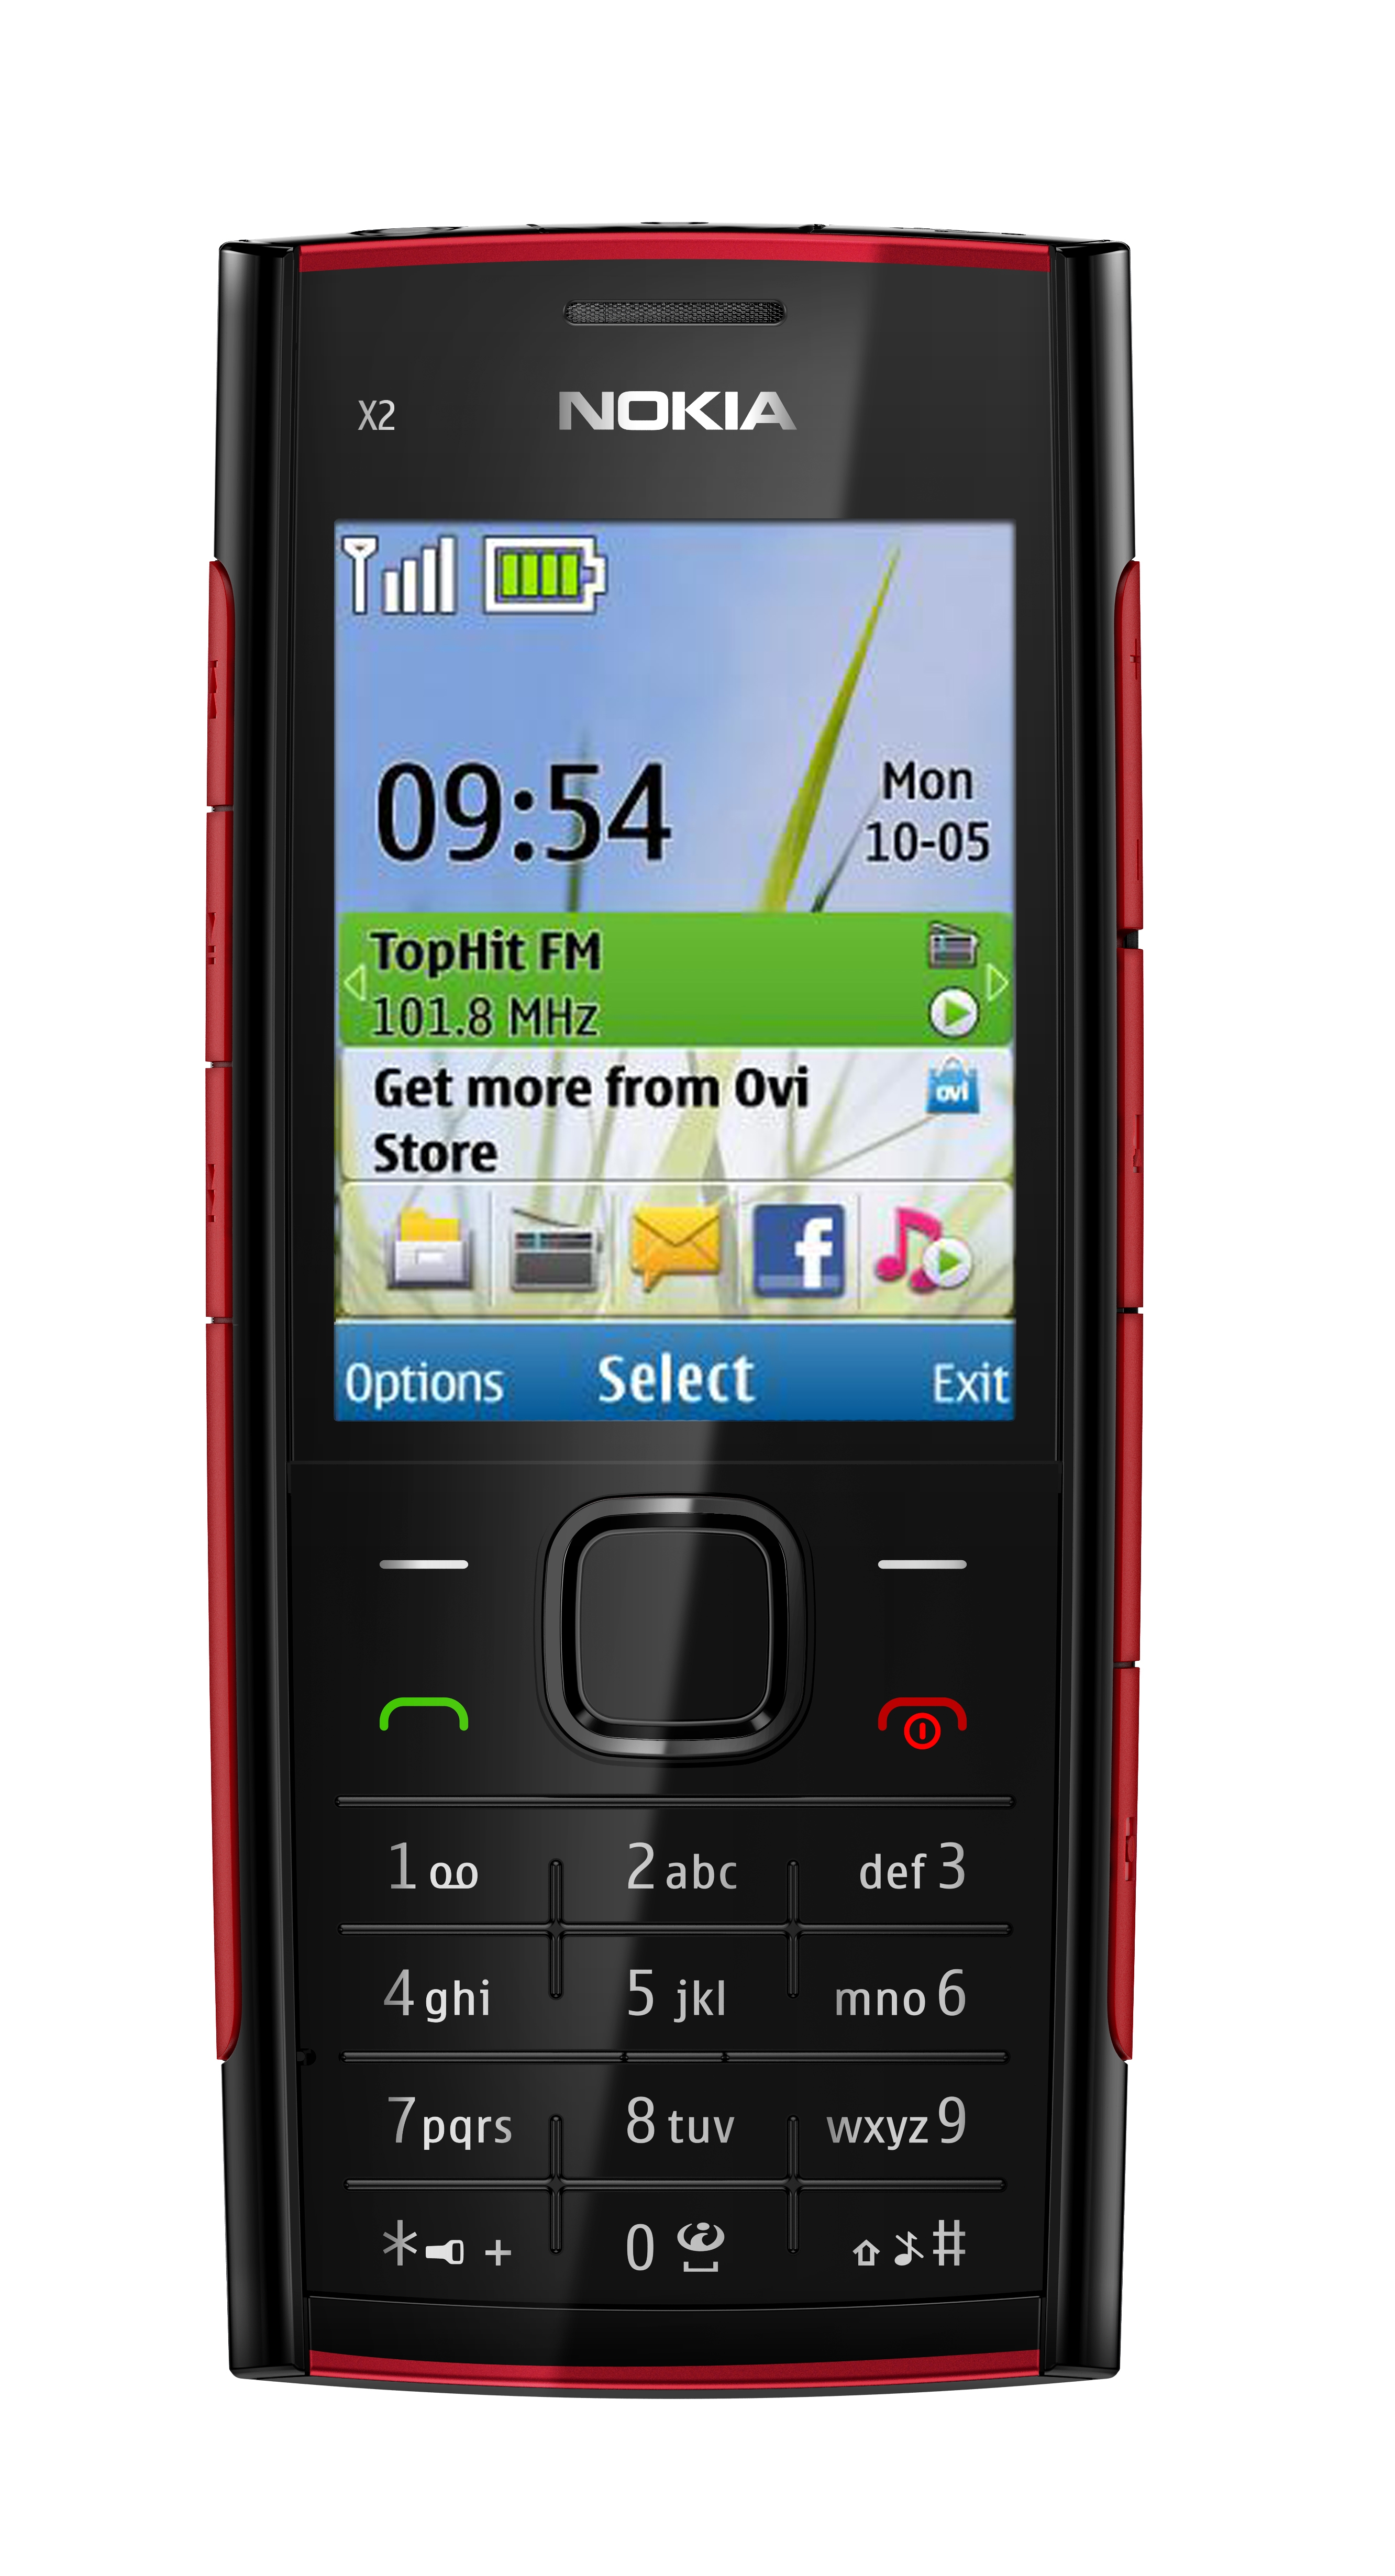 Nokia X2 - the little brother